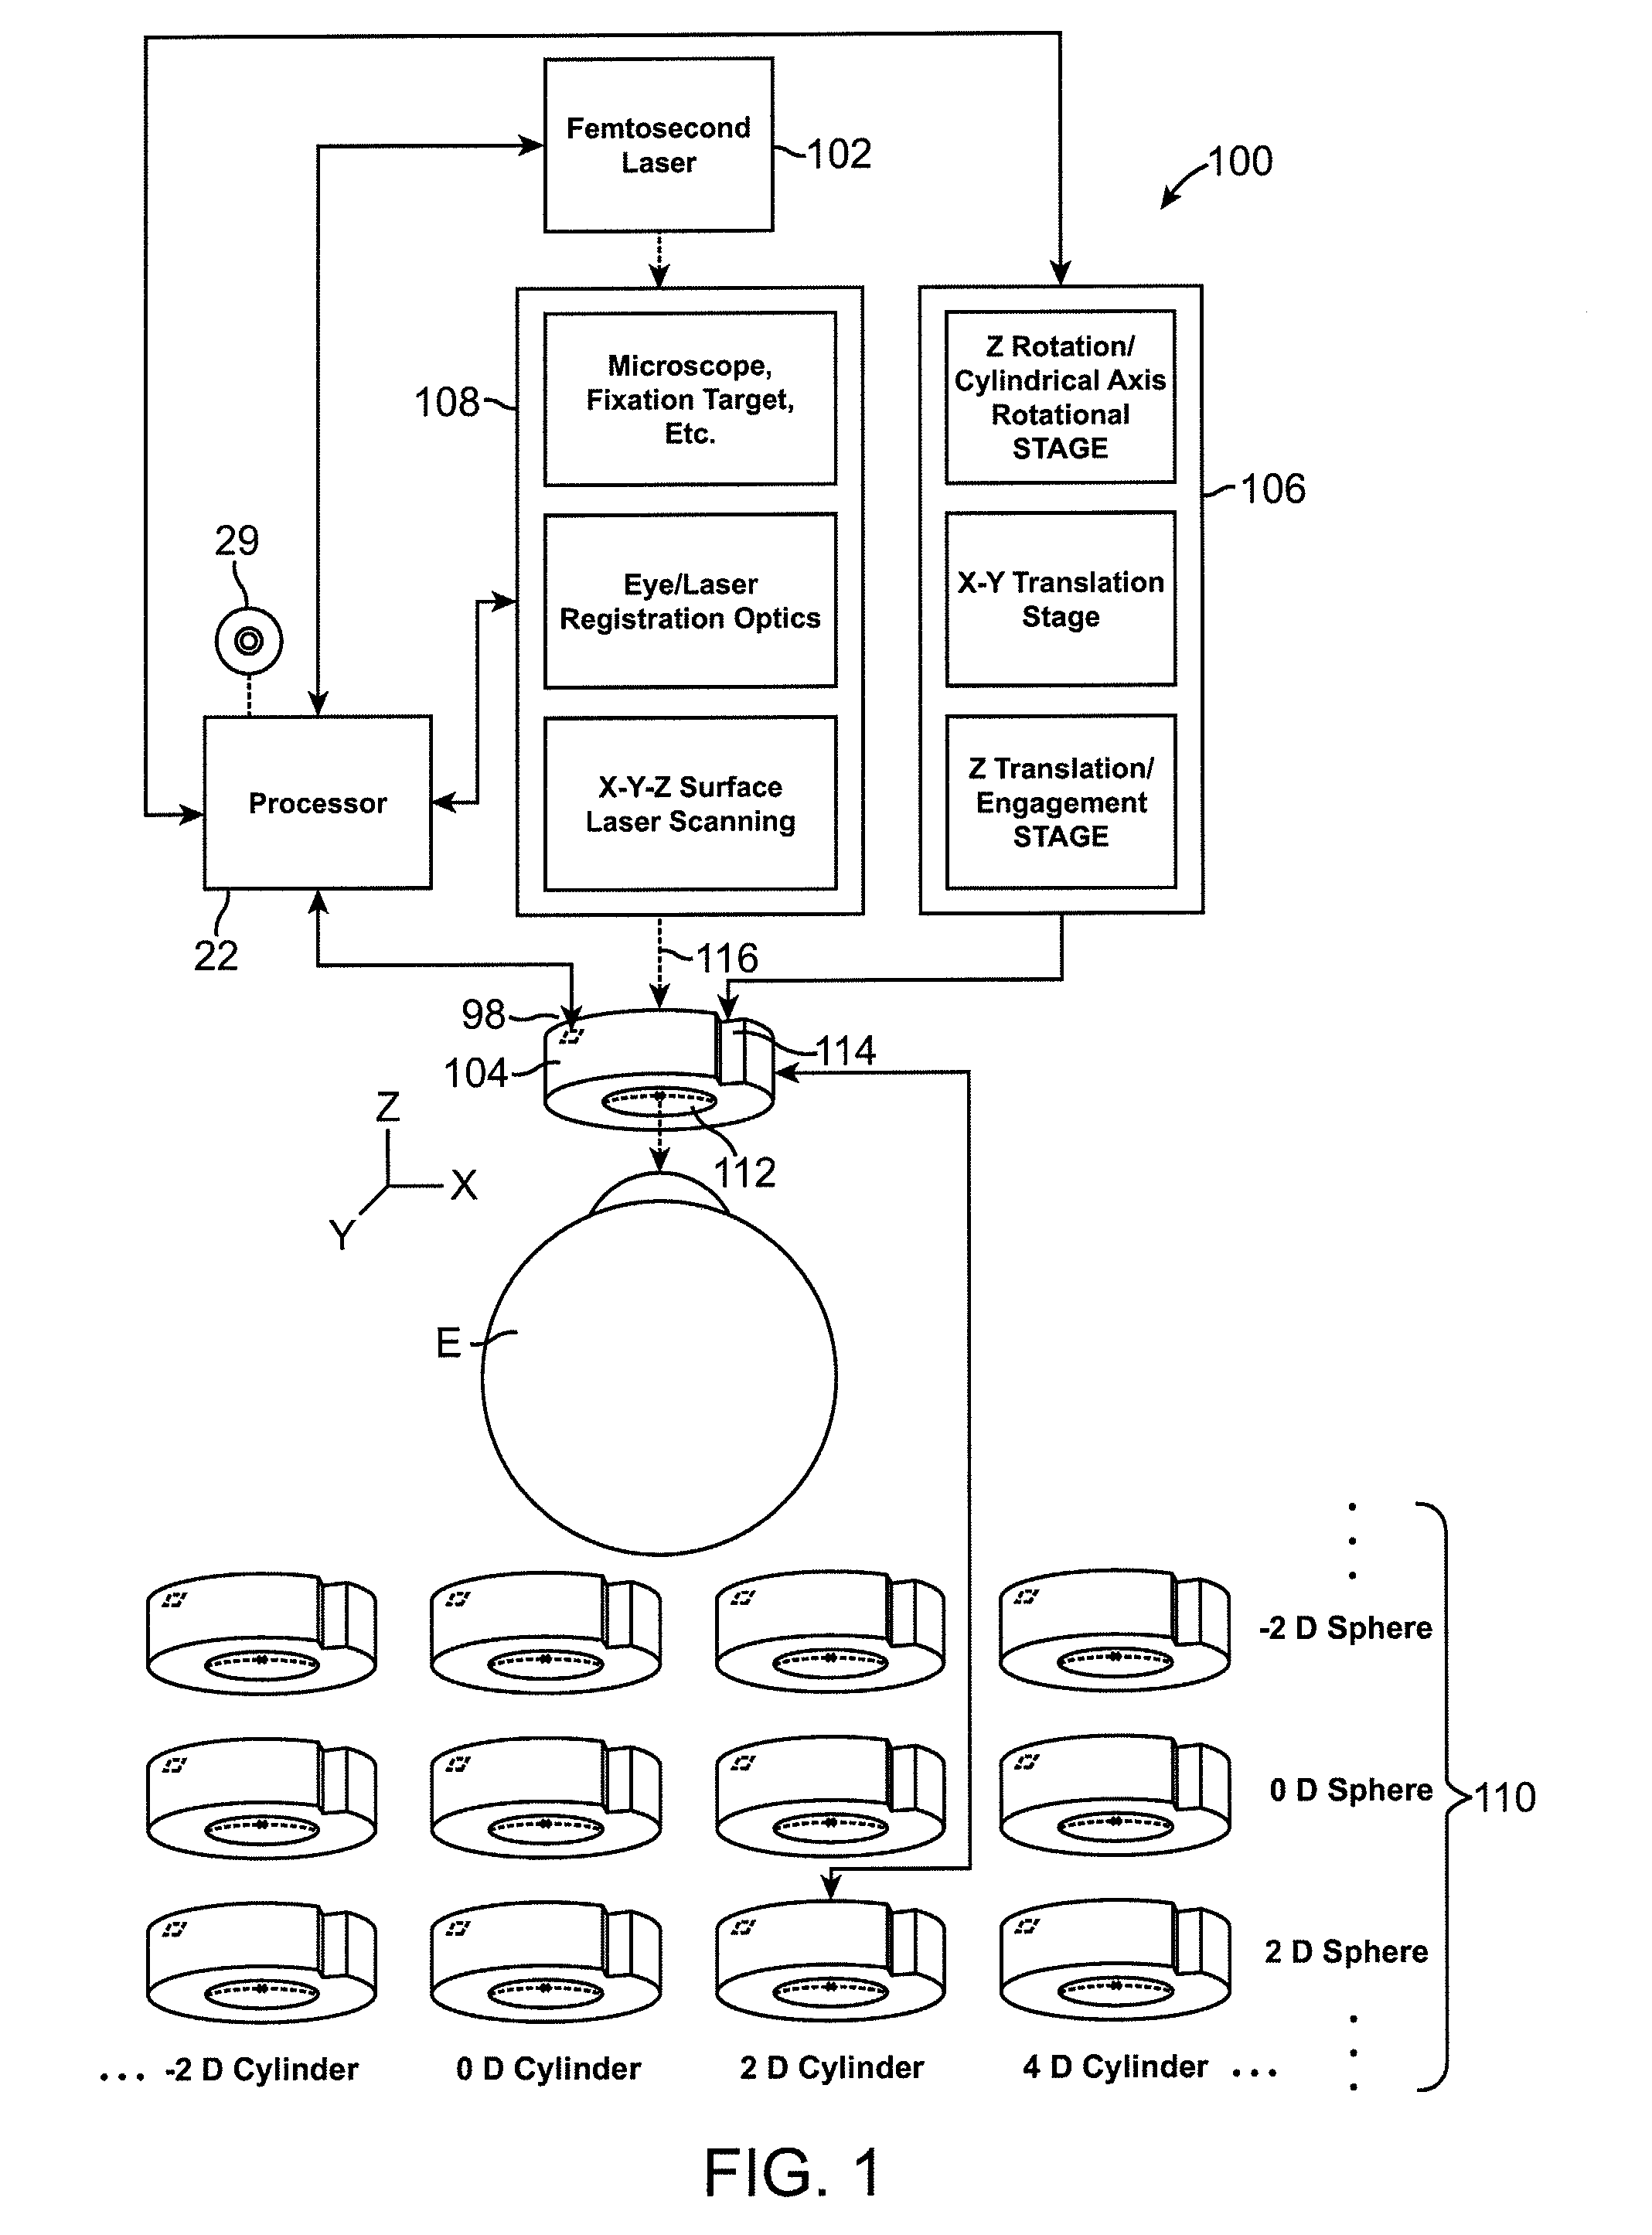 Intrastromal refractive correction systems and methods